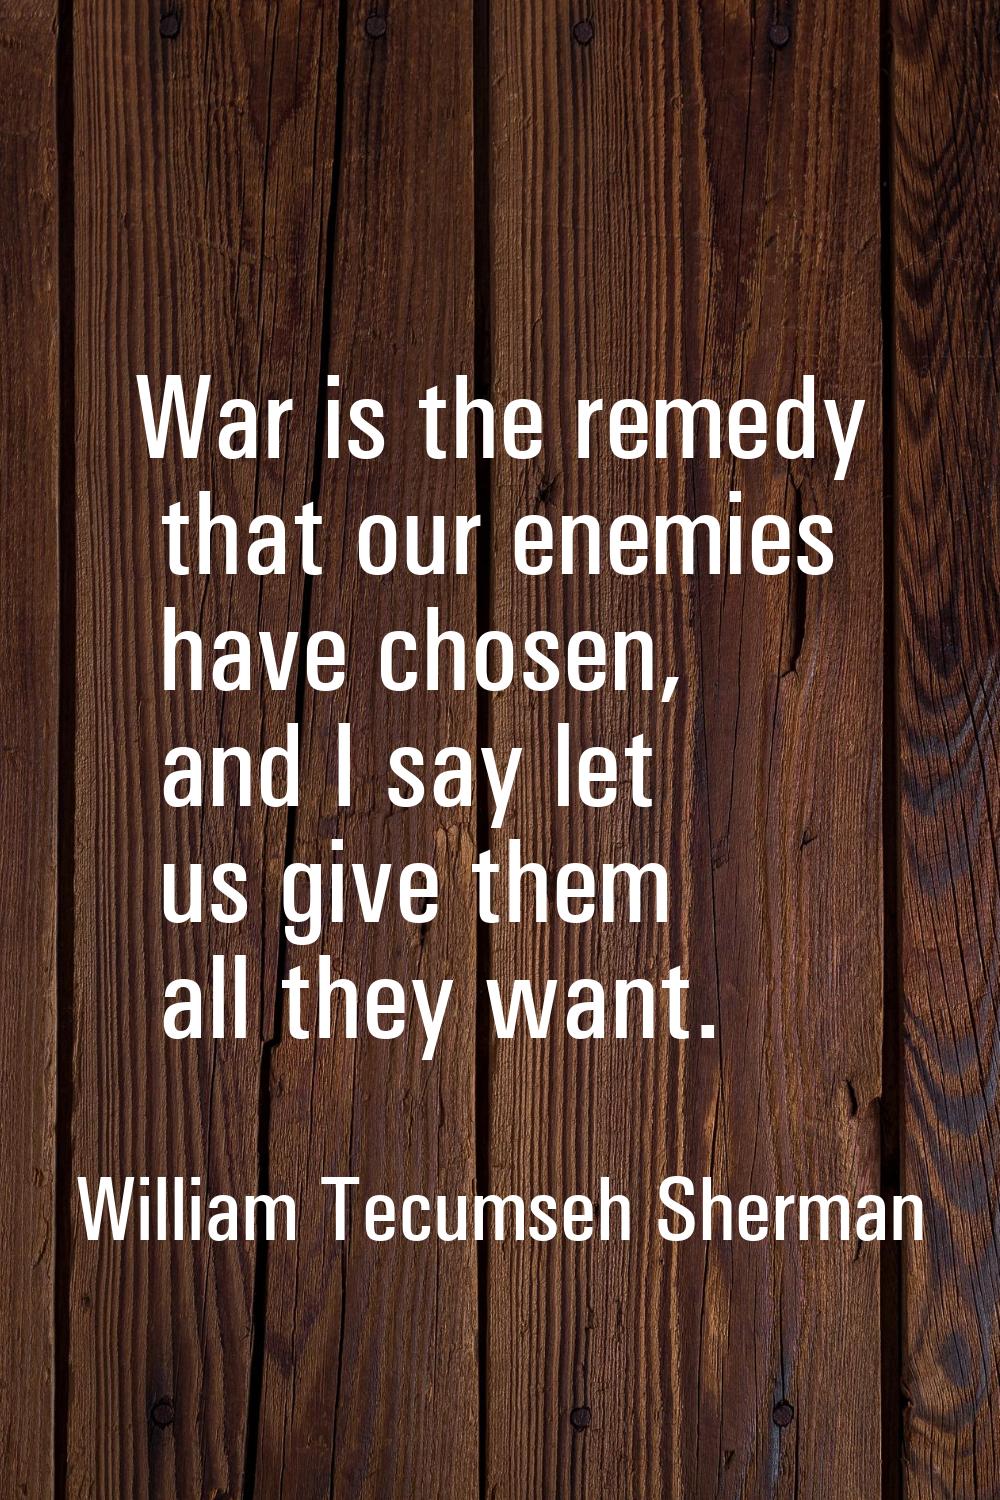 War is the remedy that our enemies have chosen, and I say let us give them all they want.